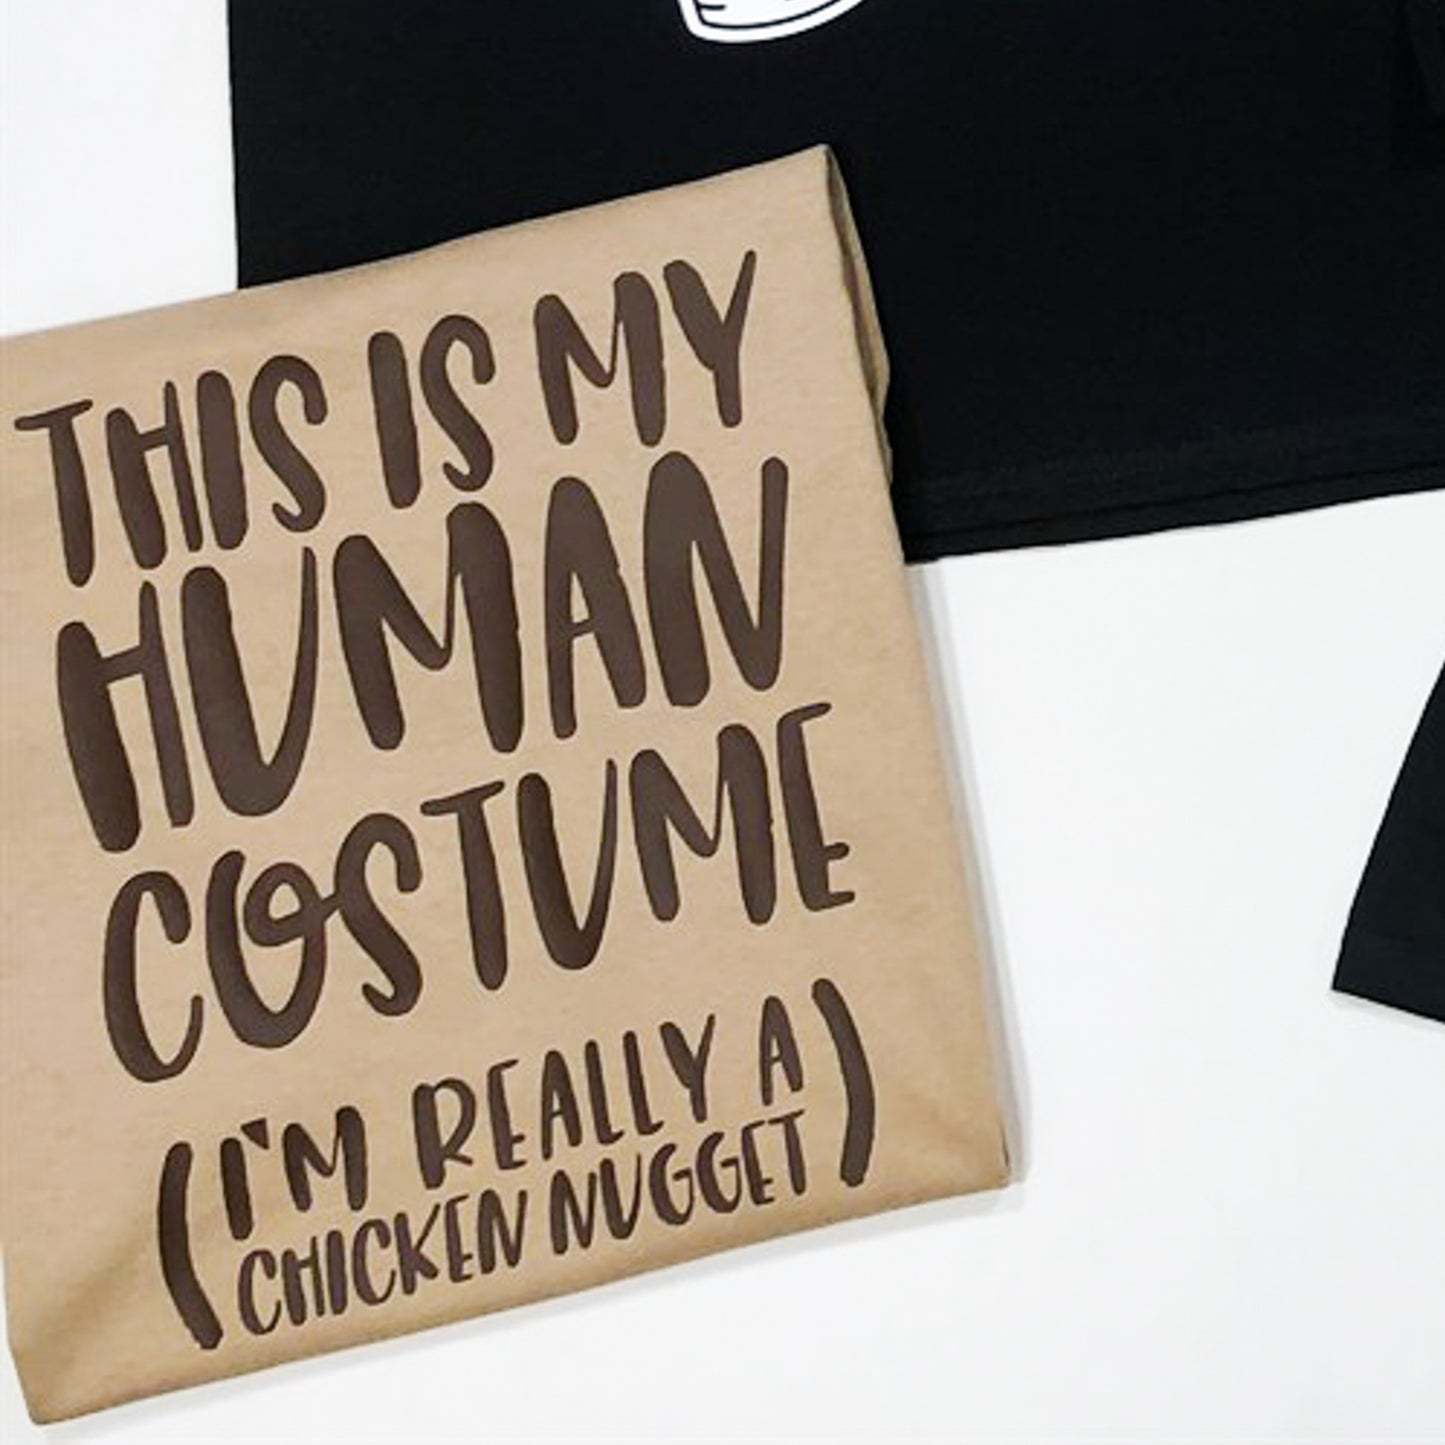 This Is My Human Costume (I'm Really a Chicken Nugget) Tee